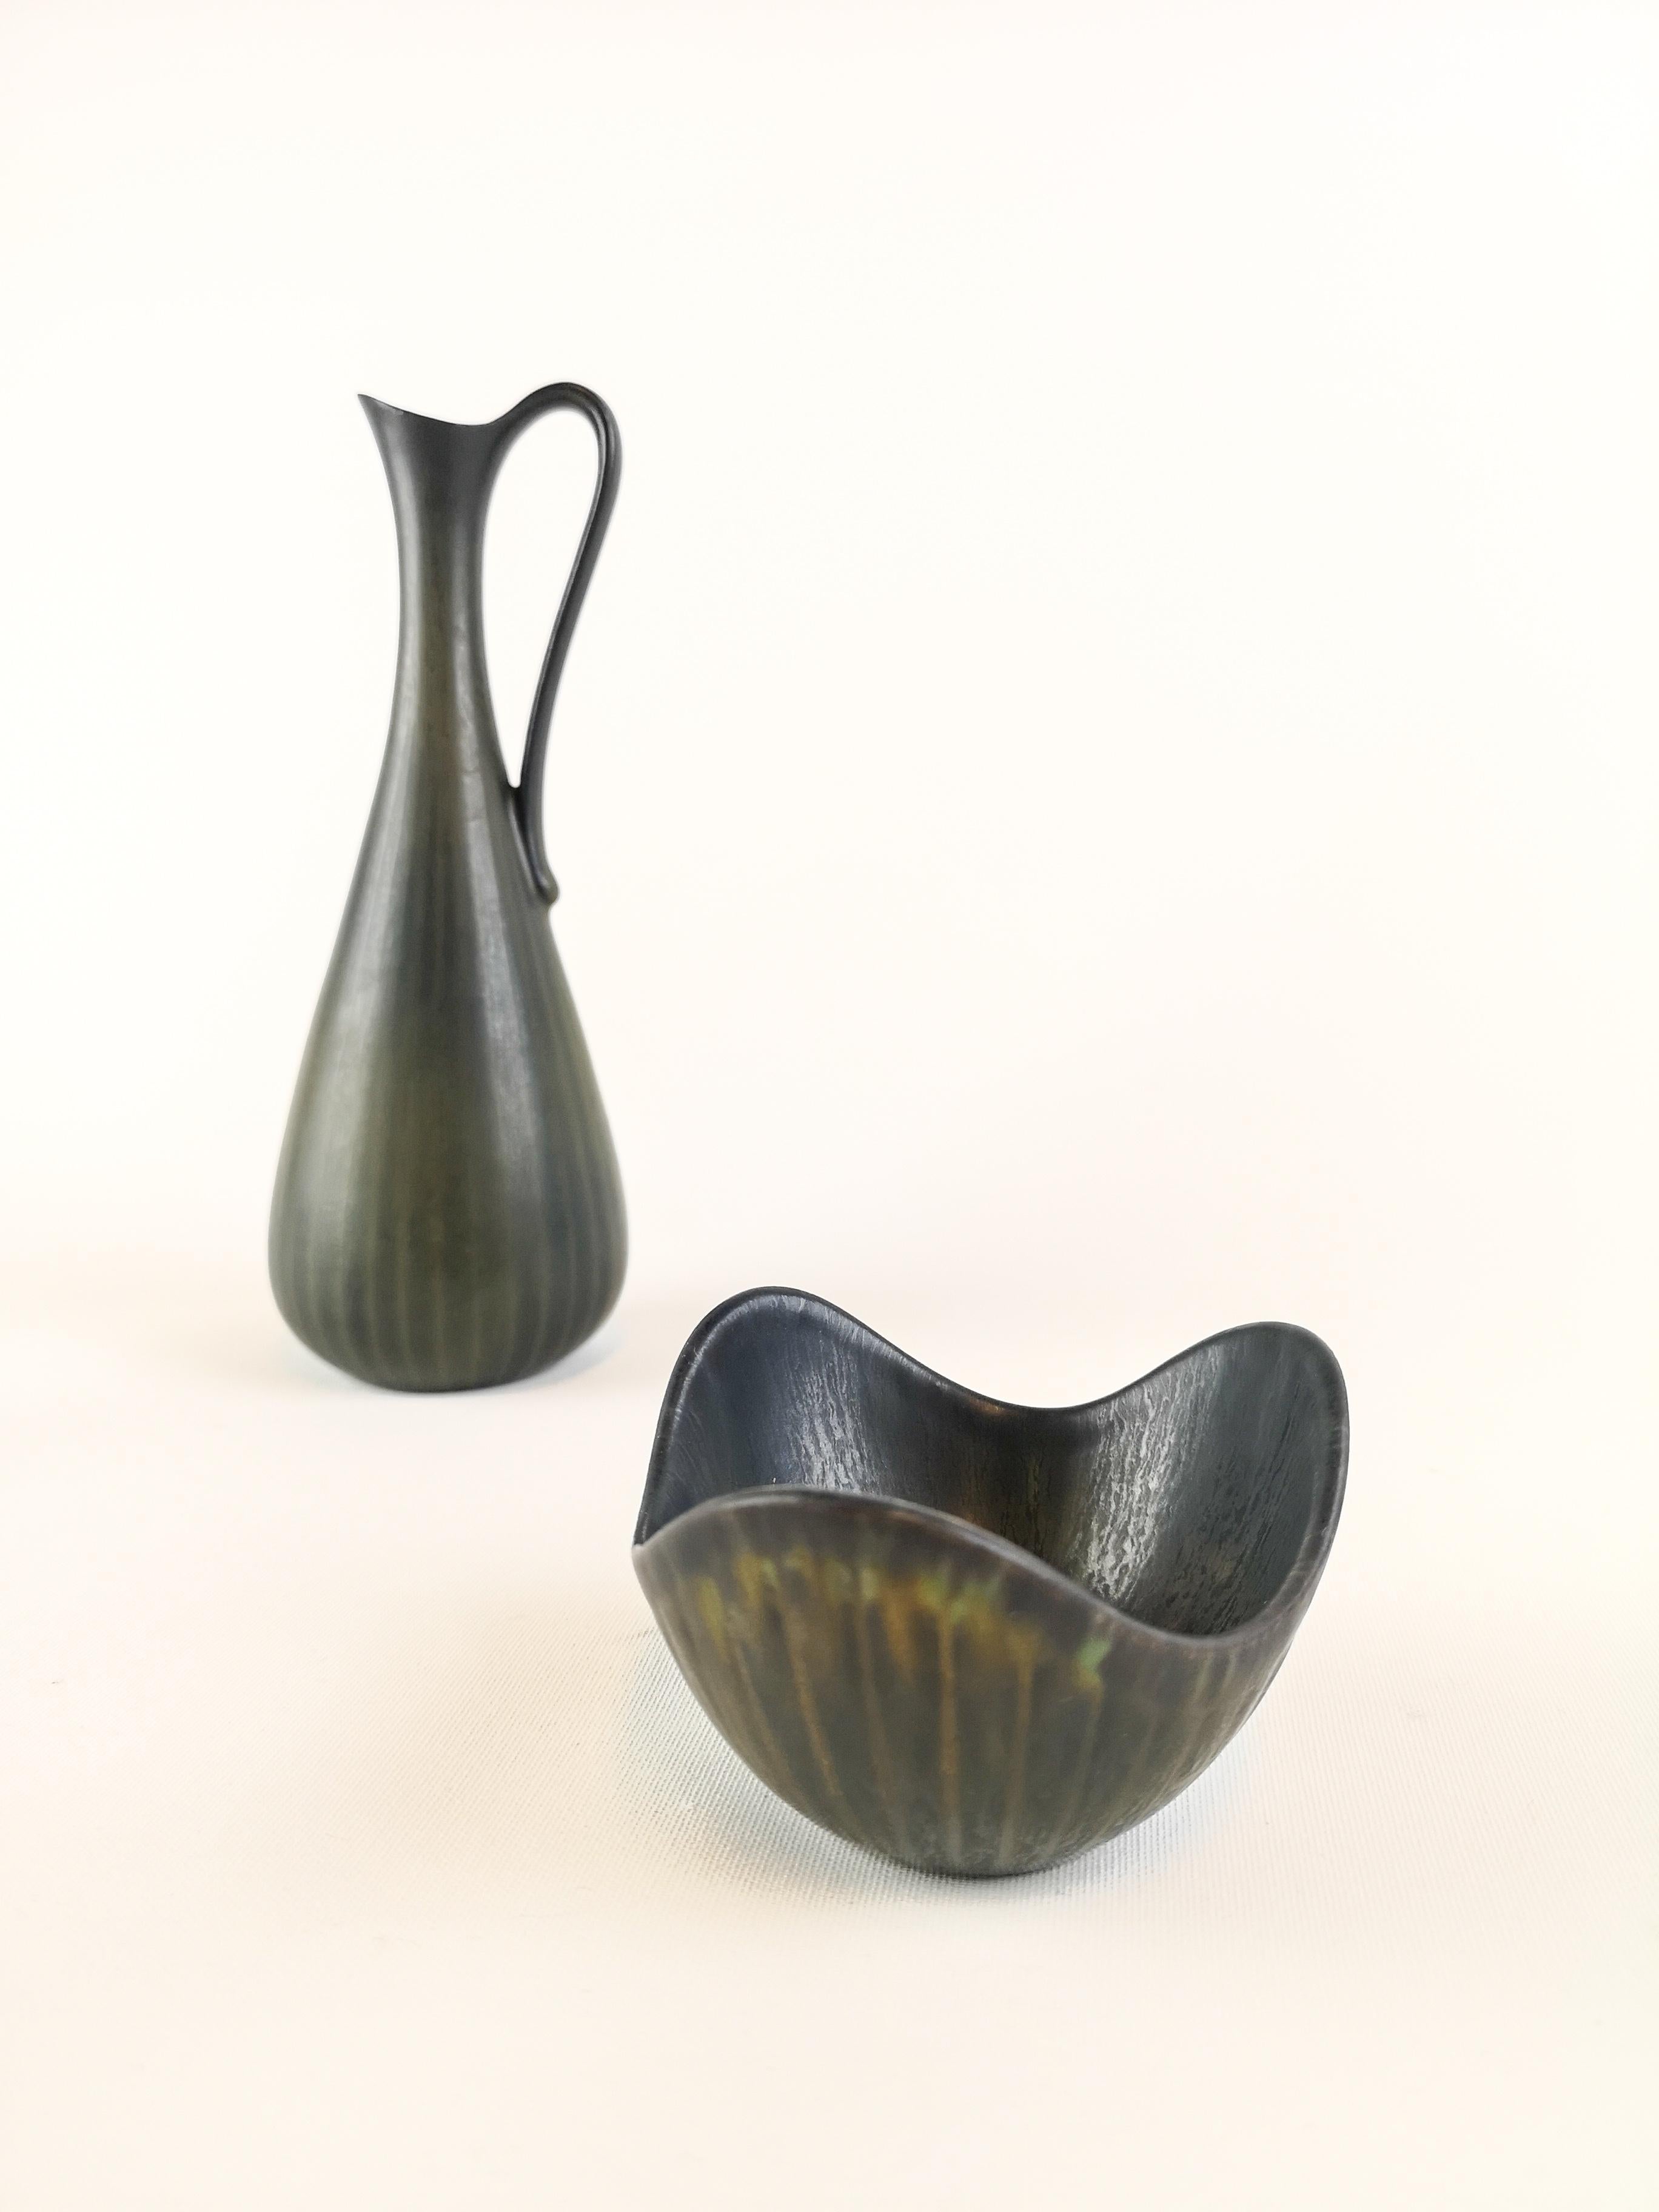 Two wonderful pieces made in Sweden during the 1950s at Rörstrand factory and designed by Gunnar Nylund.

The vase matches the bowl and gives a clean and modern look. The vase and bowl are nicely sculptured and have a nice glaze.

Good